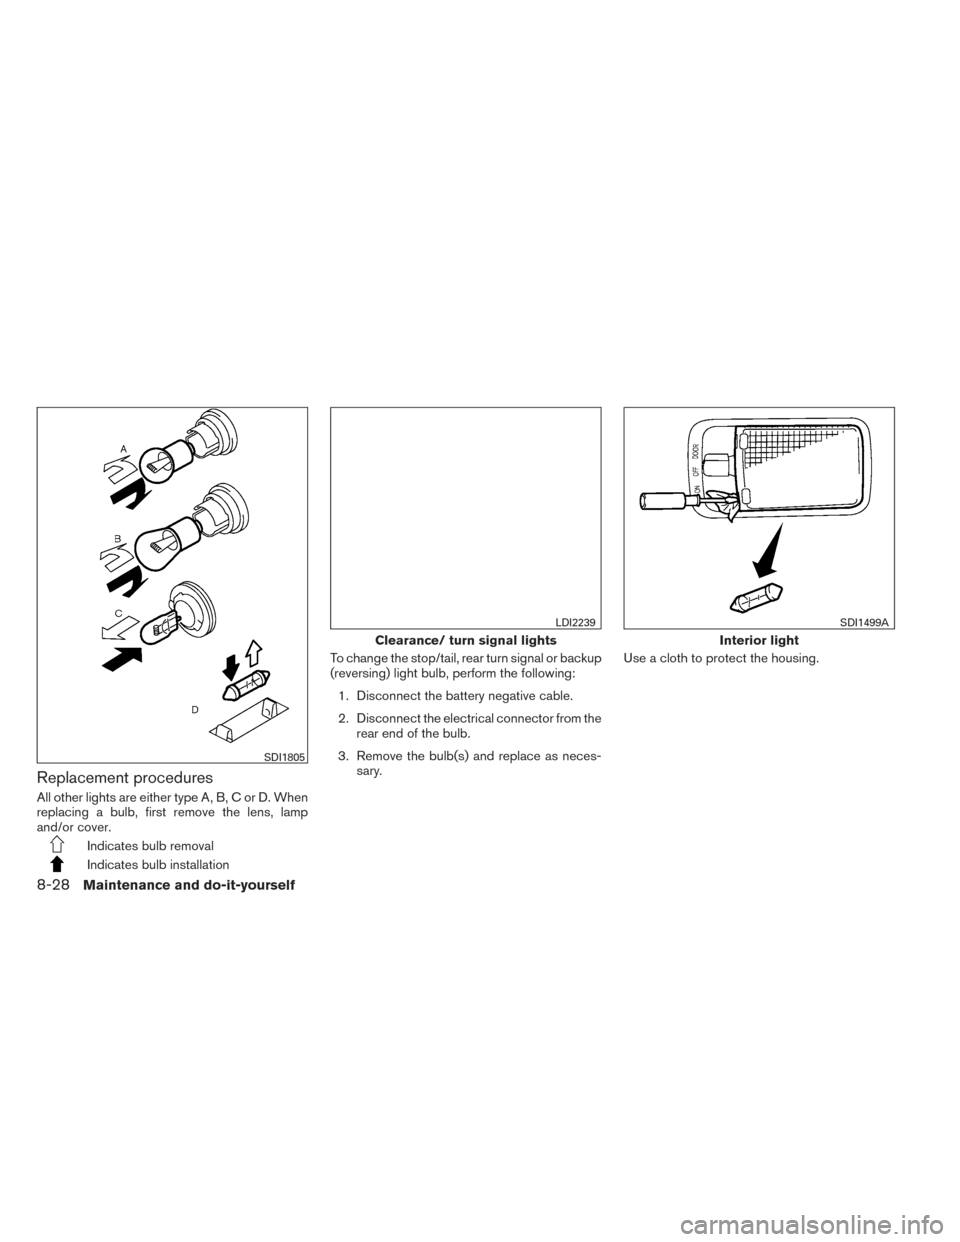 NISSAN VERSA NOTE 2014 2.G Owners Manual Replacement procedures
All other lights are either type A, B, C or D. When
replacing a bulb, first remove the lens, lamp
and/or cover.
Indicates bulb removal
Indicates bulb installationTo change the s